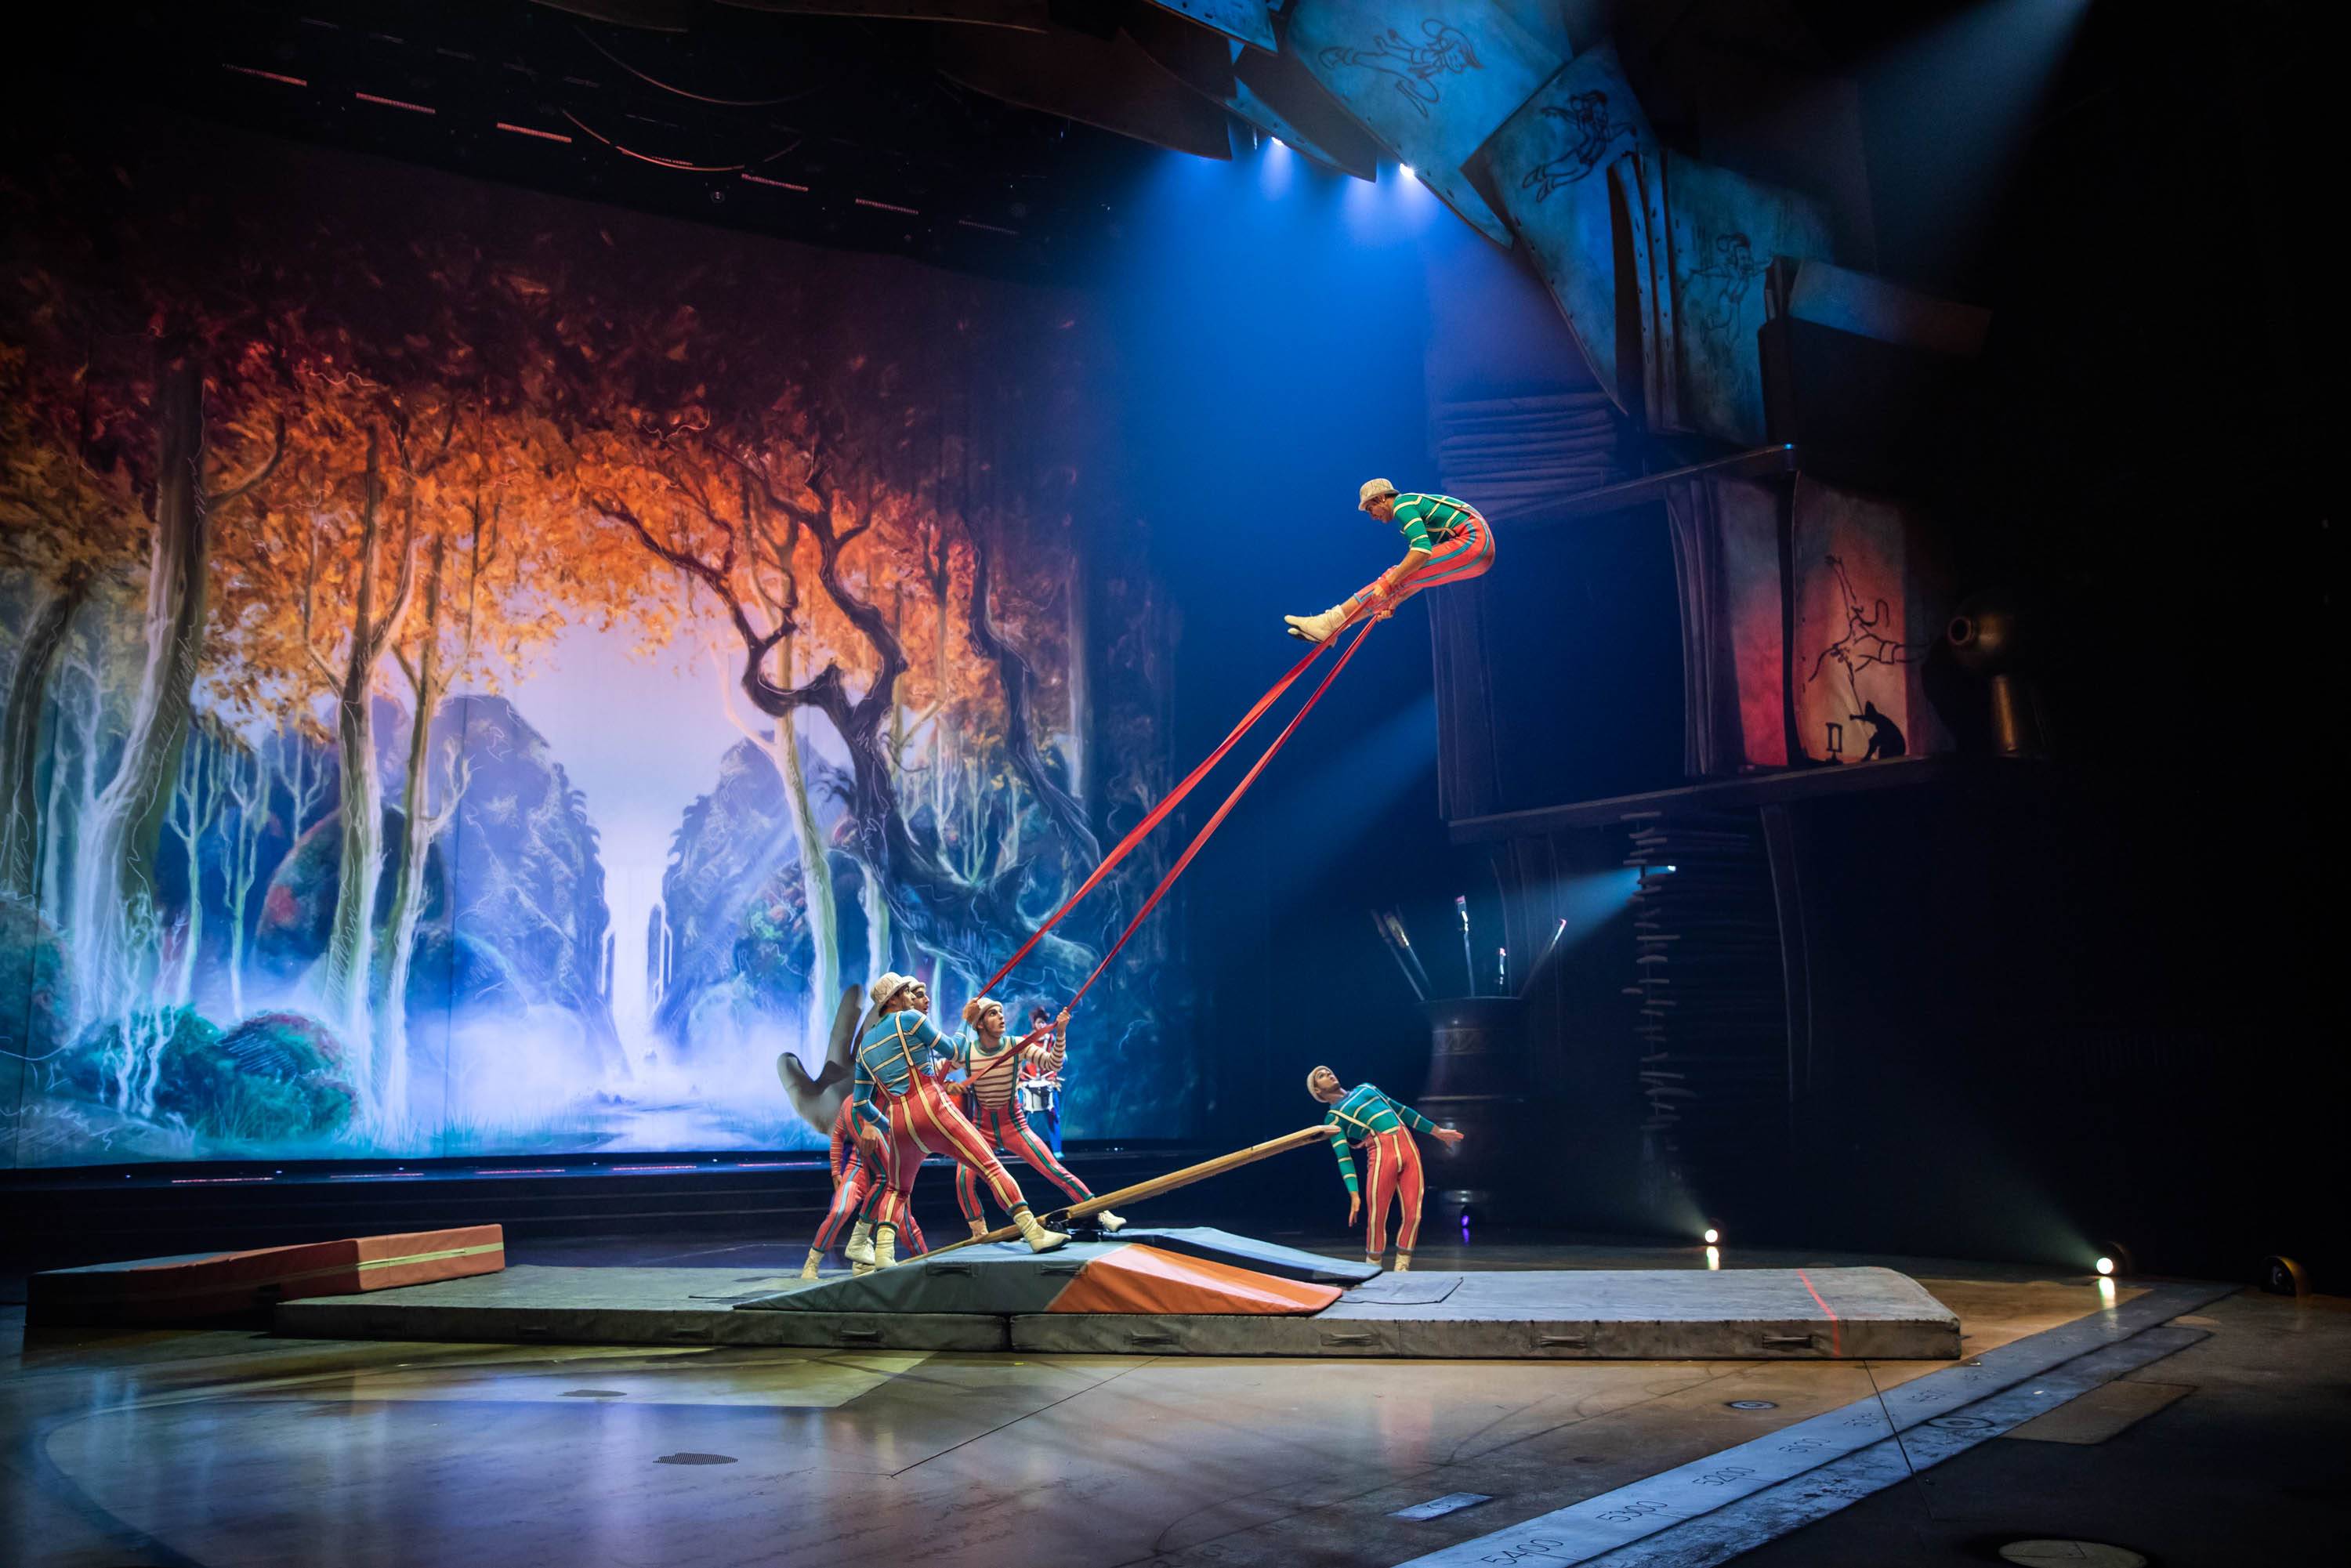 Scenes from Drawn to Life presented by Cirque du Soleil and Disney